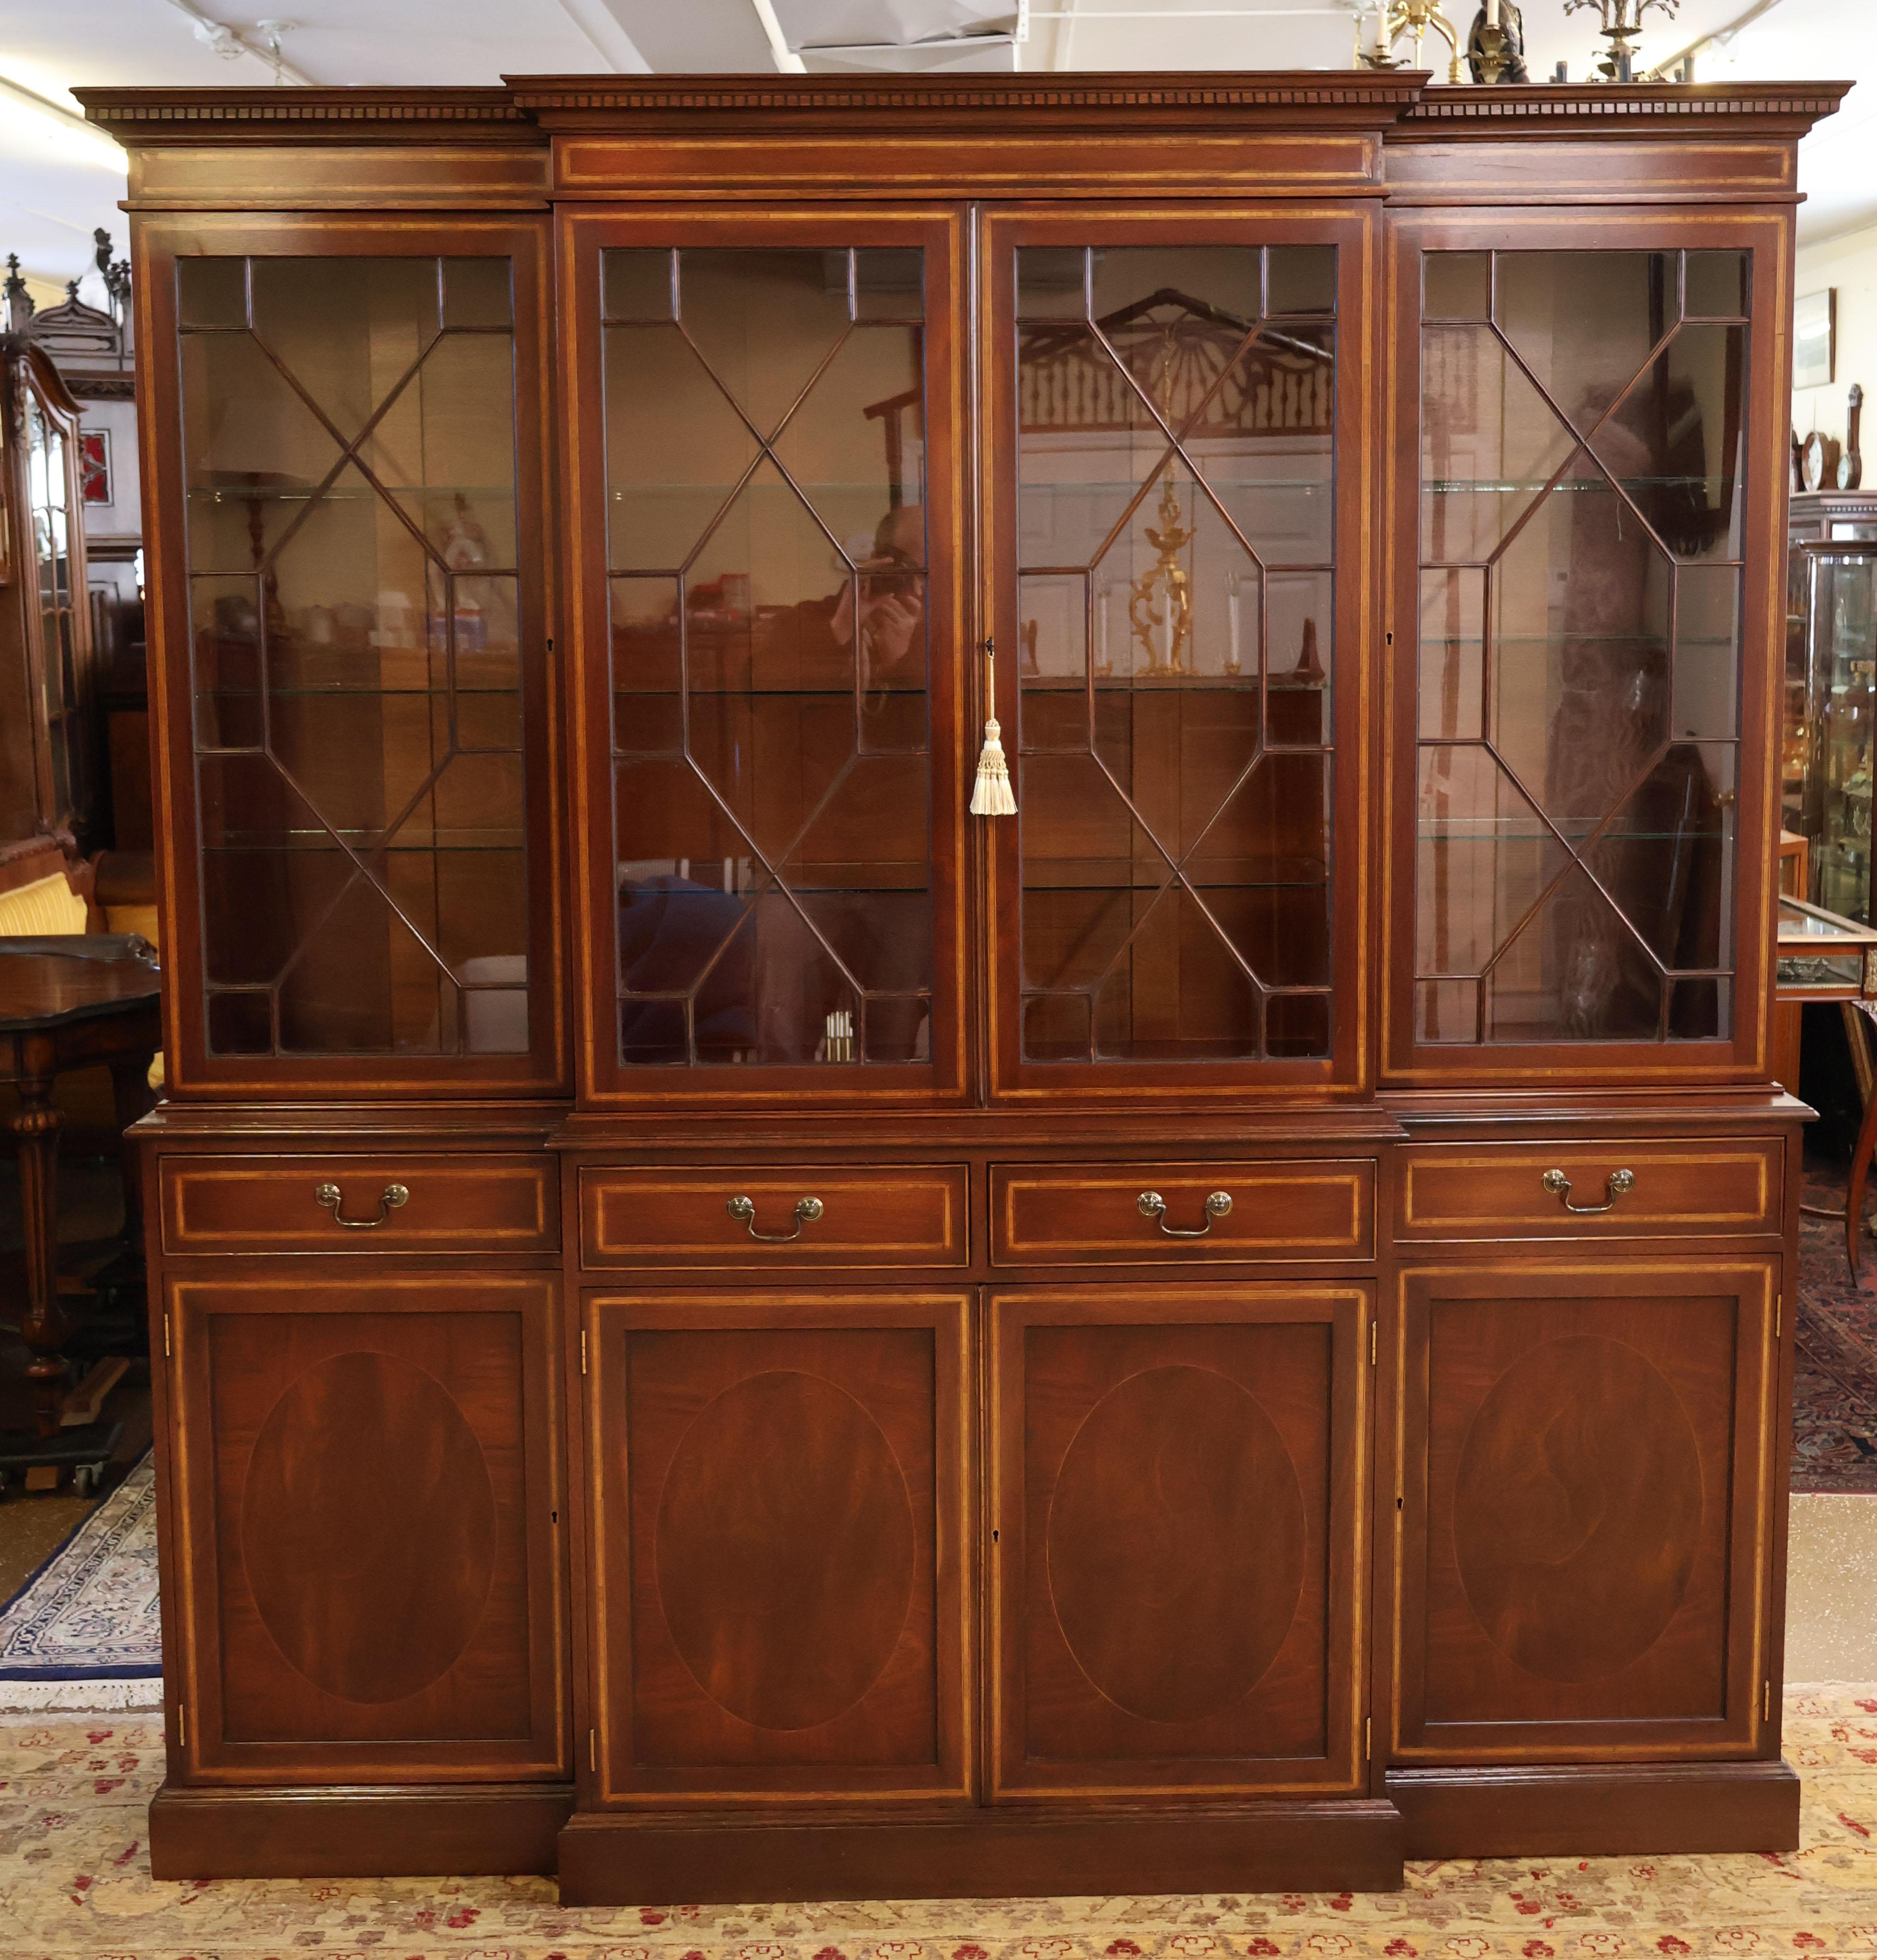 Gorgeous English George II Style Mahogany Inlaid Bookcase Breakfront

Dimensions : 85